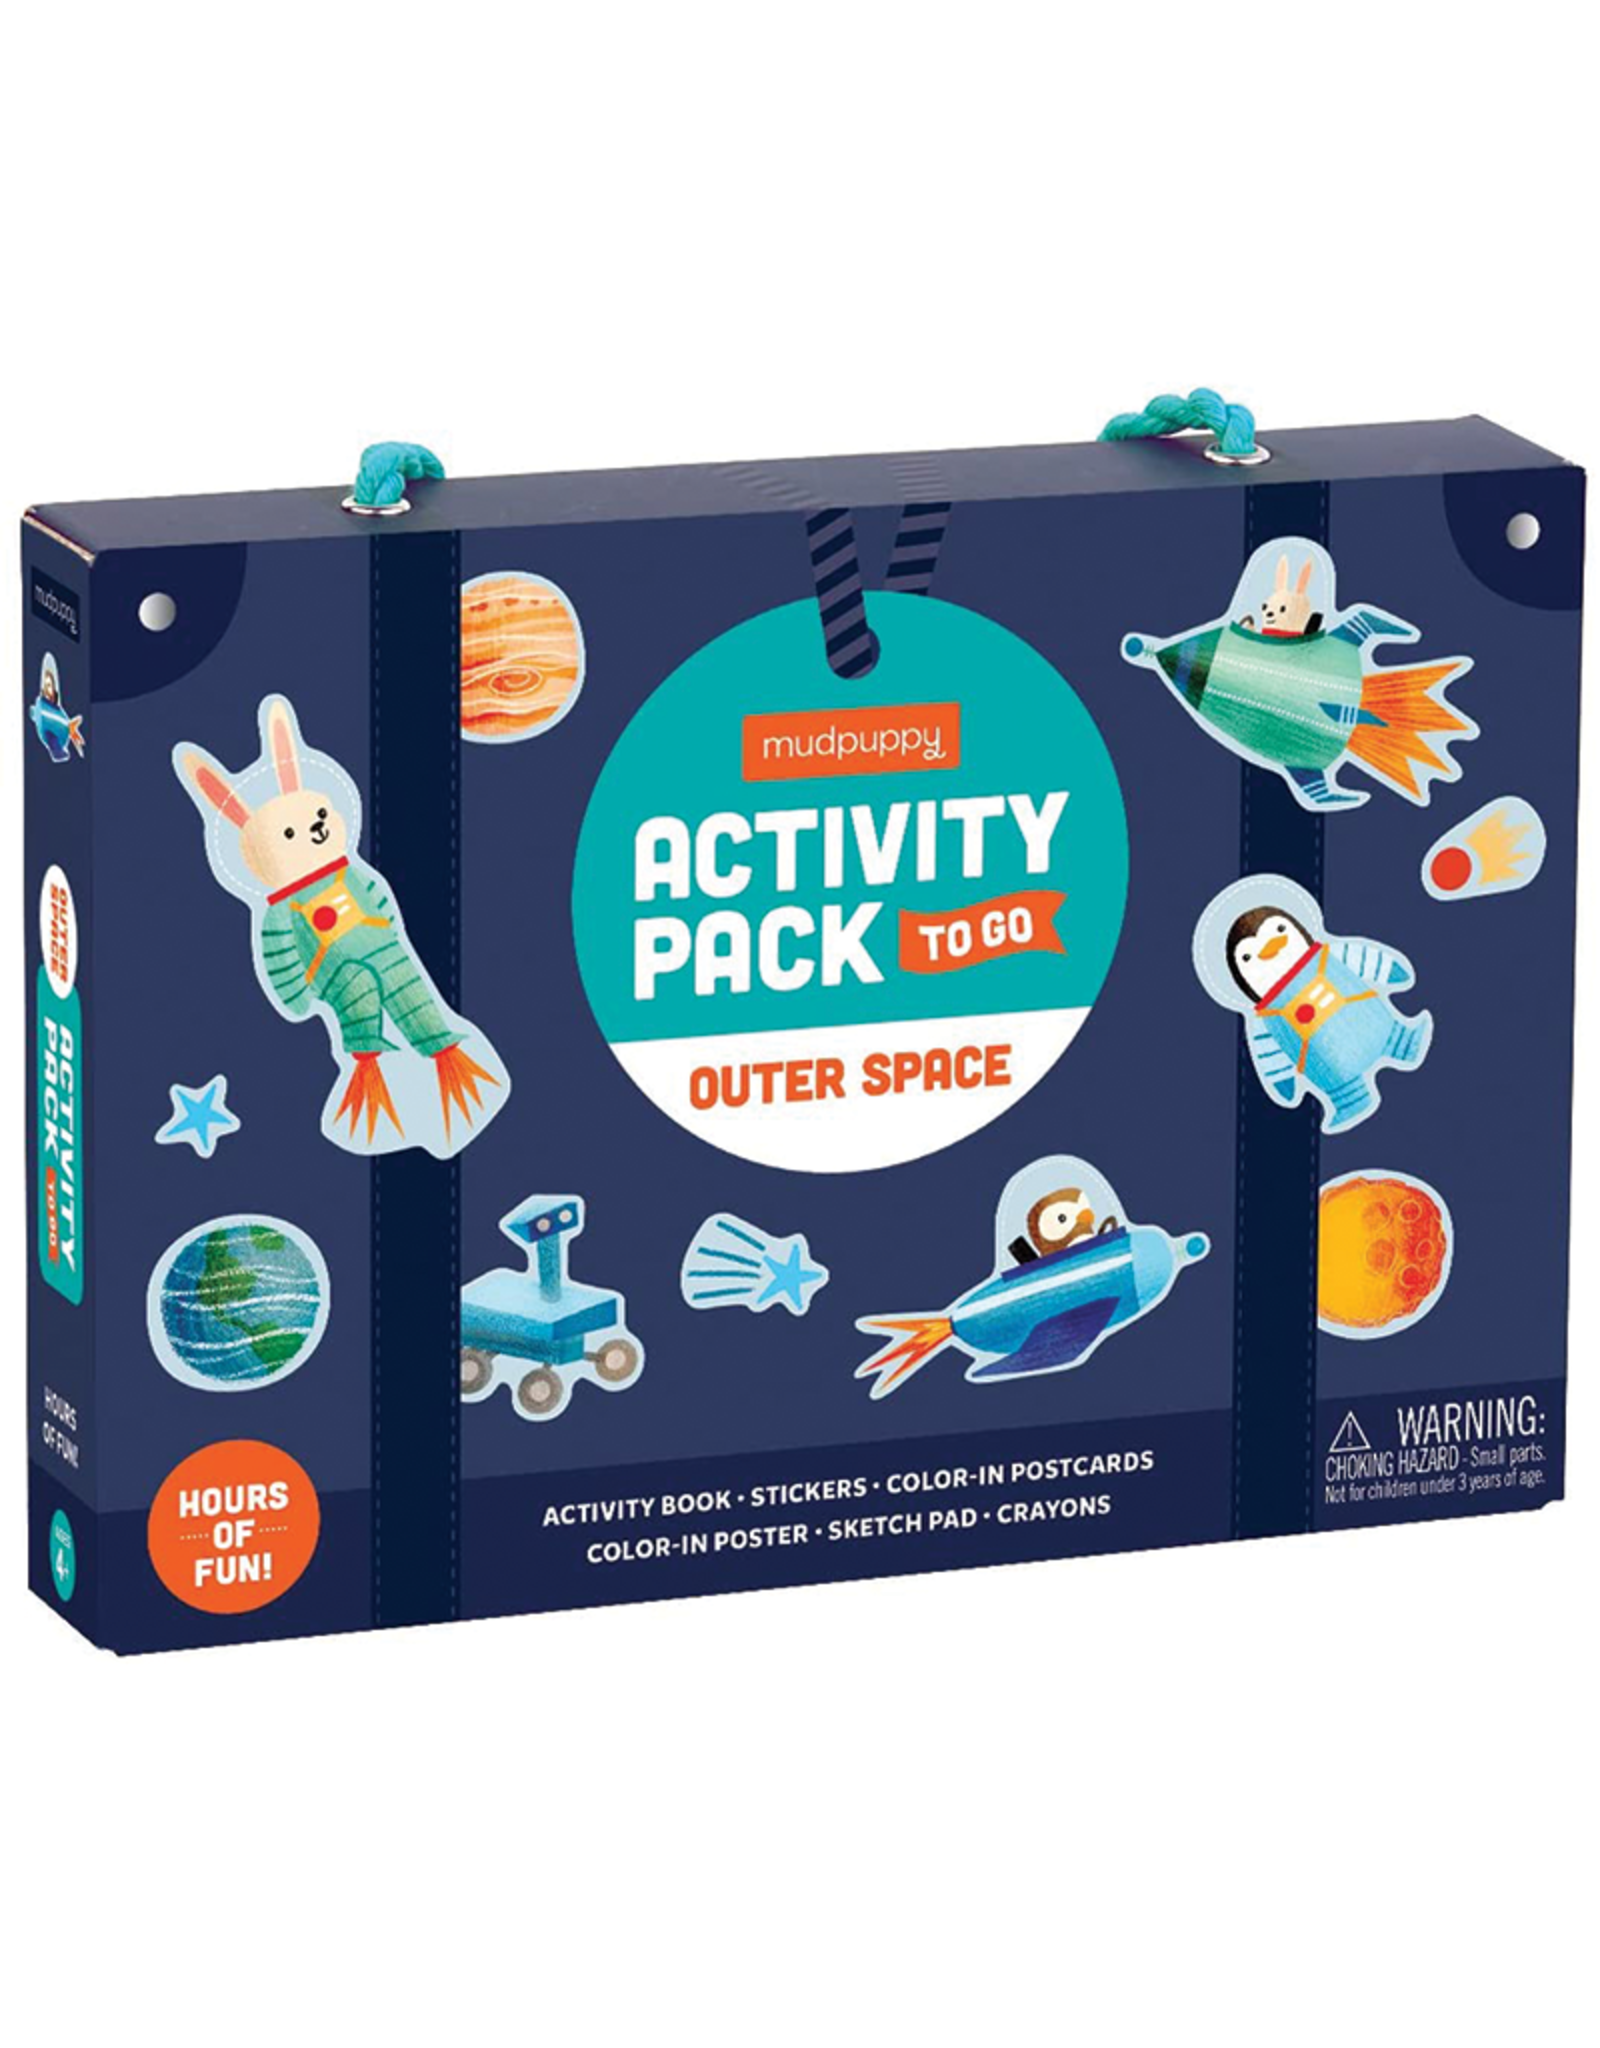 Mudpuppy Outer Space:  Activity Pack to Go